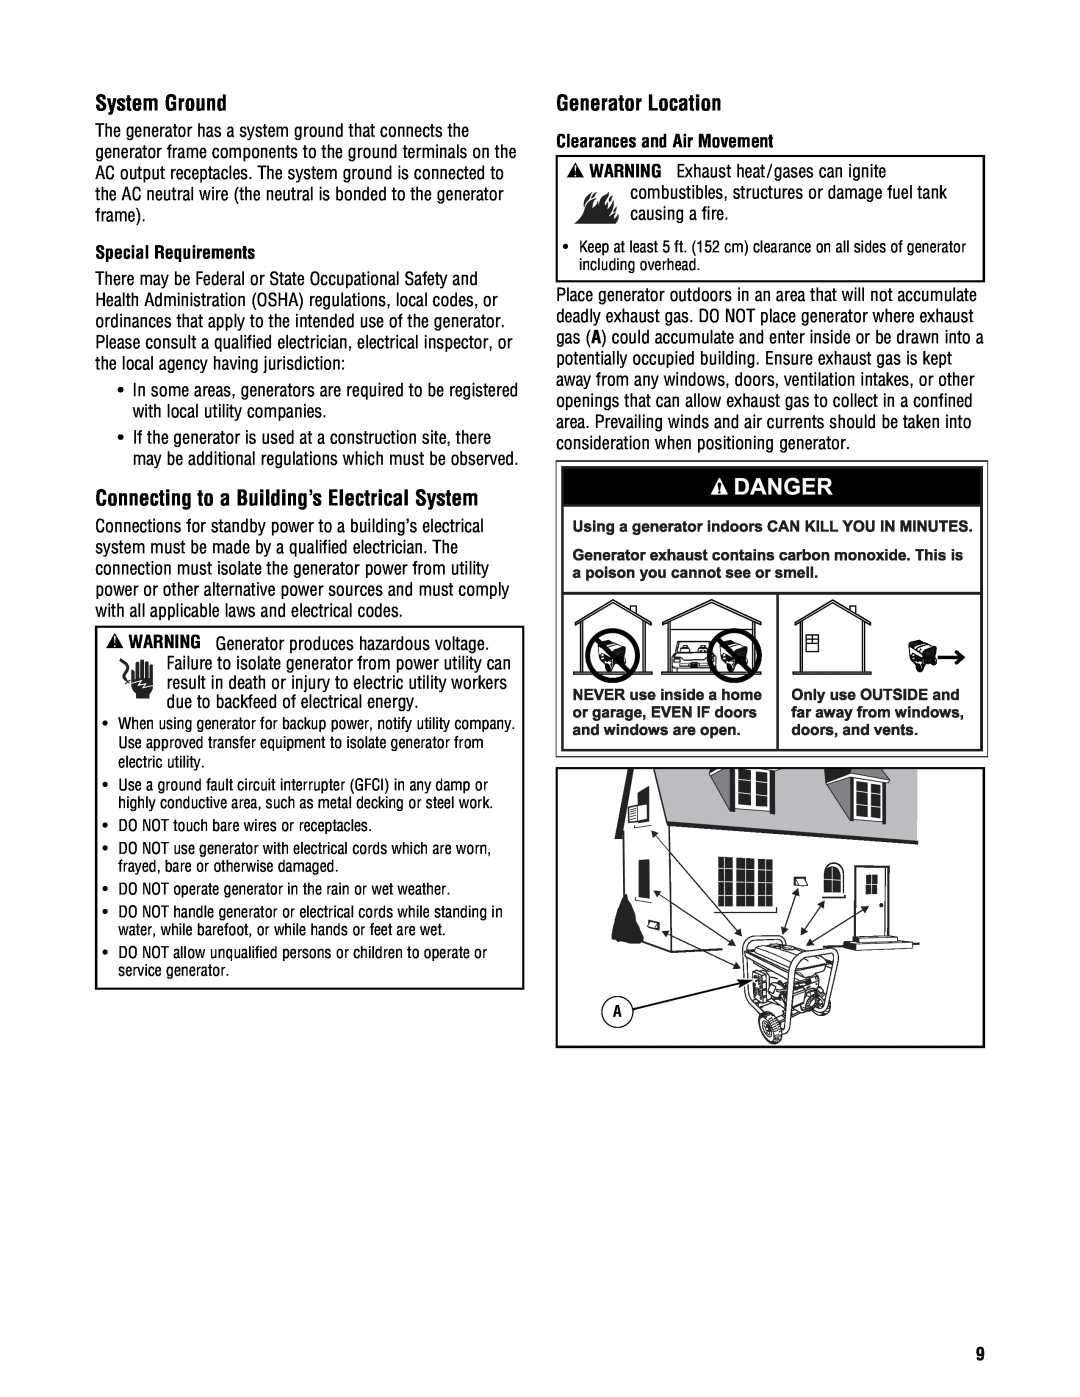 Briggs & Stratton 209443gs manual System Ground, Connecting to a Building’s Electrical System, Generator Location 